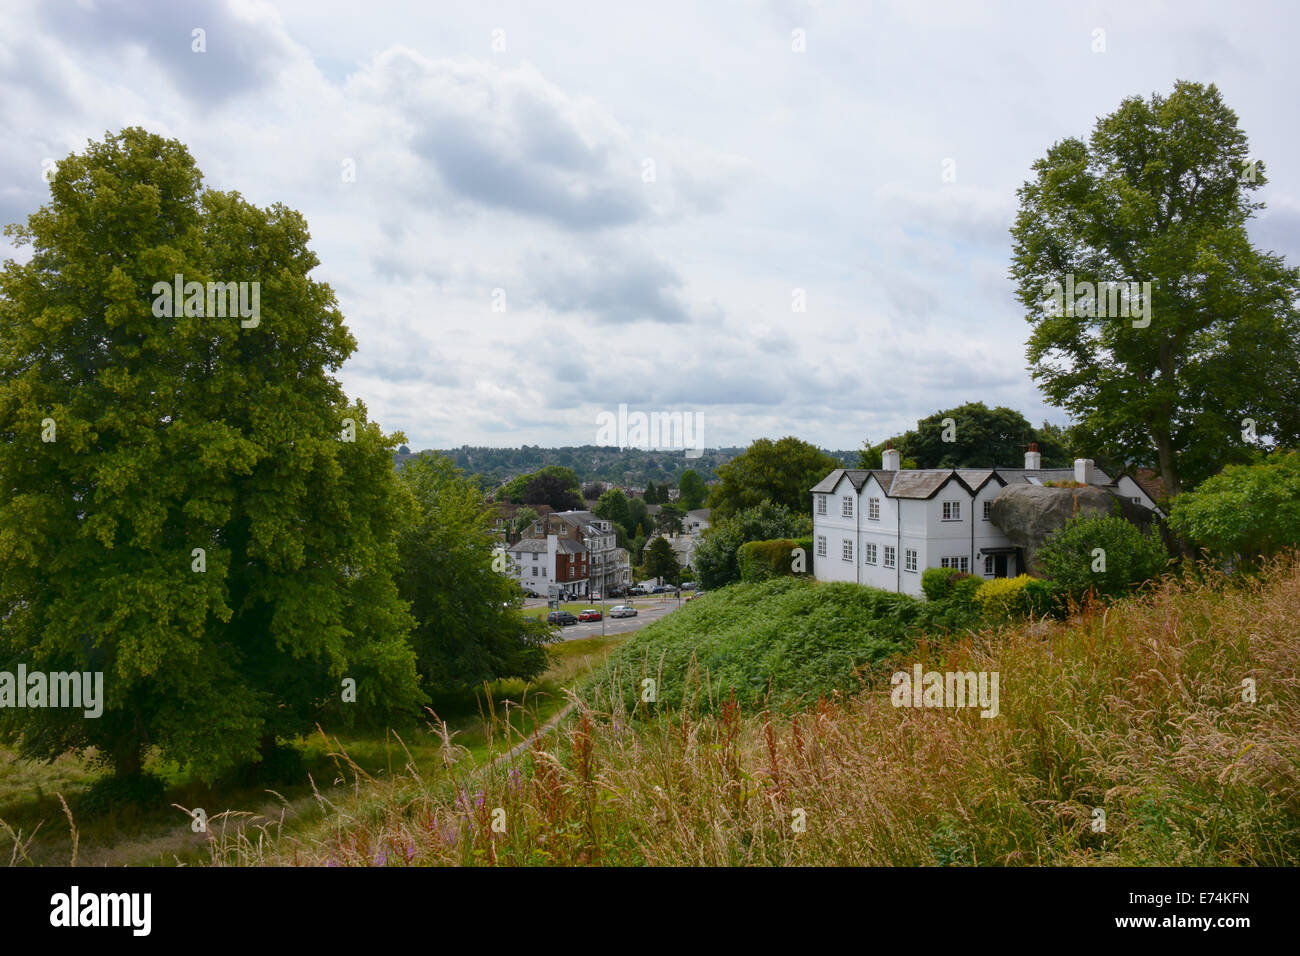 A view from Mount Ephraim looking over the common toward the spa town of Royal Tunbridge Wells in Kent. Stock Photo